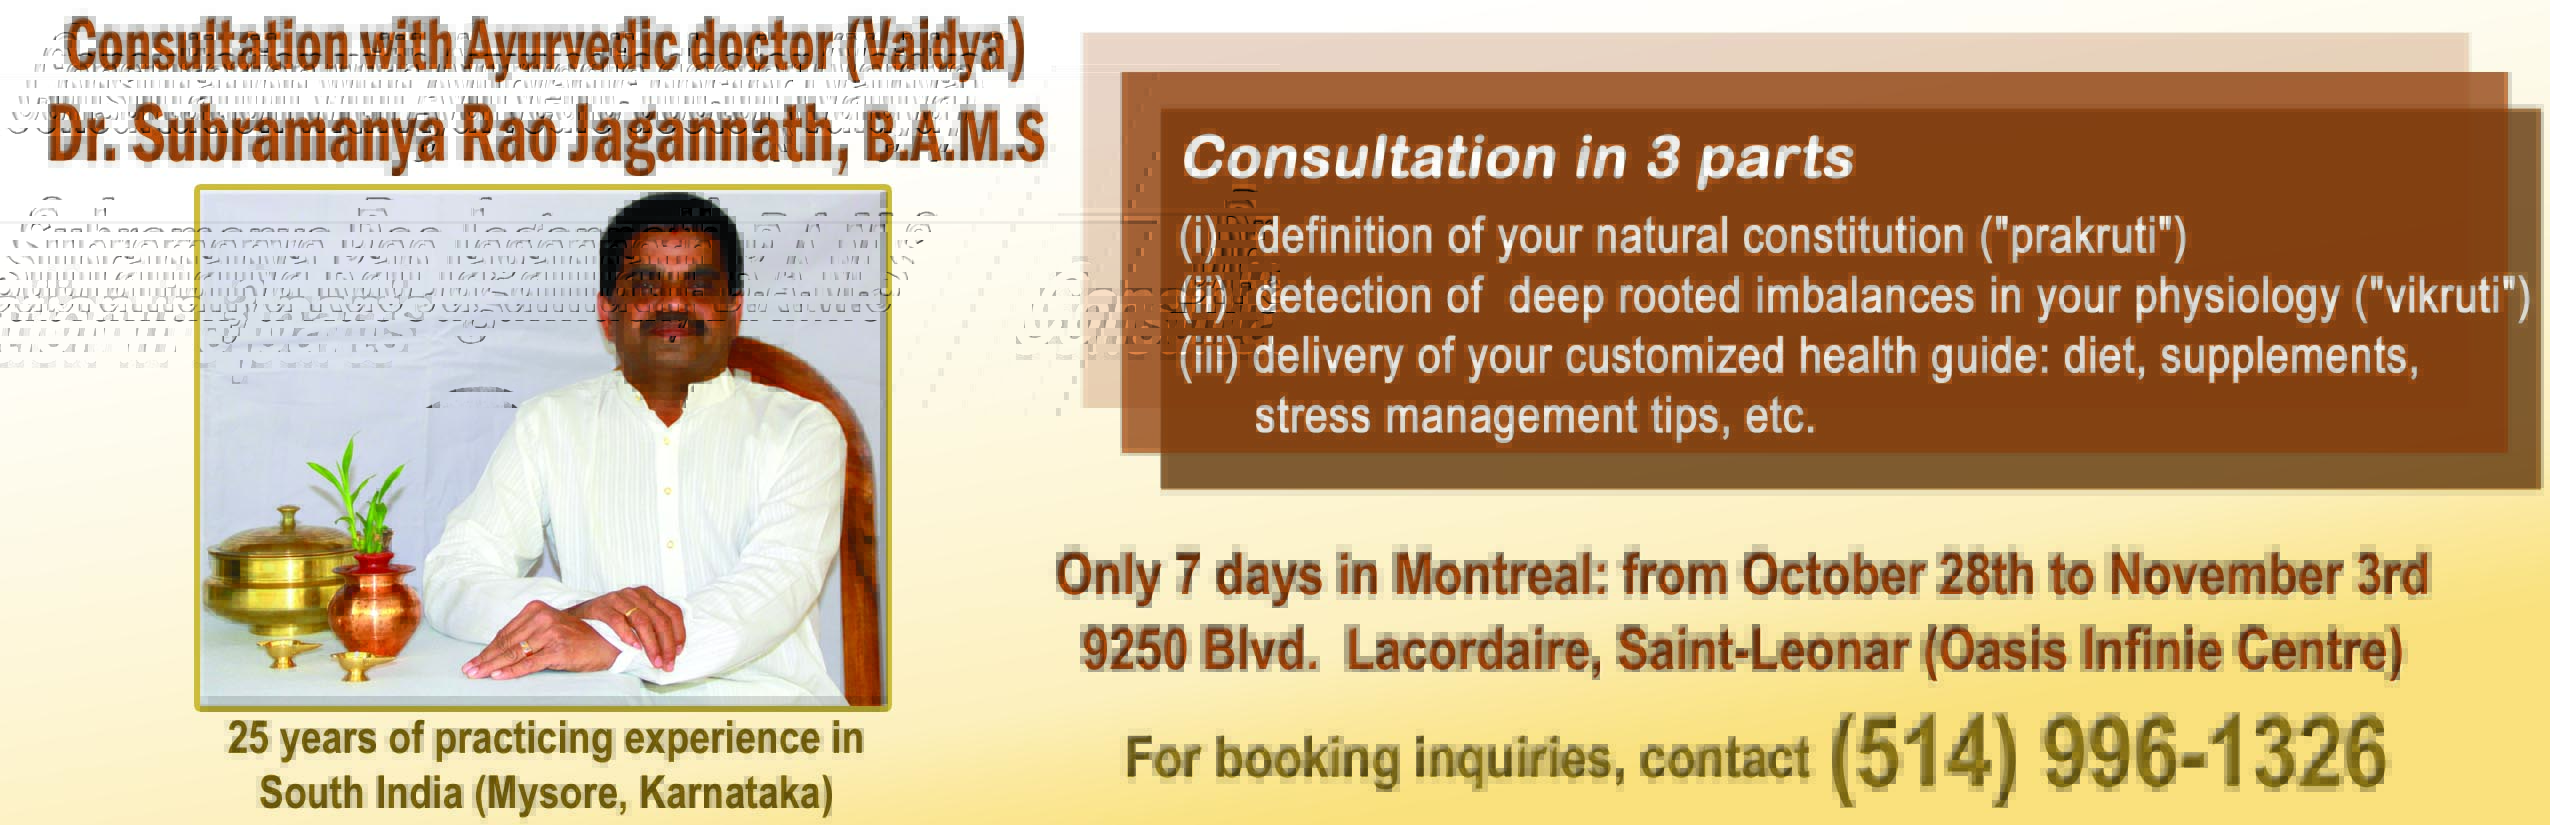 Consultation with Ayurvedic Doctor Subramanya Rao Jagannath in Montreal from Oct. 28th to Nov. 3rd